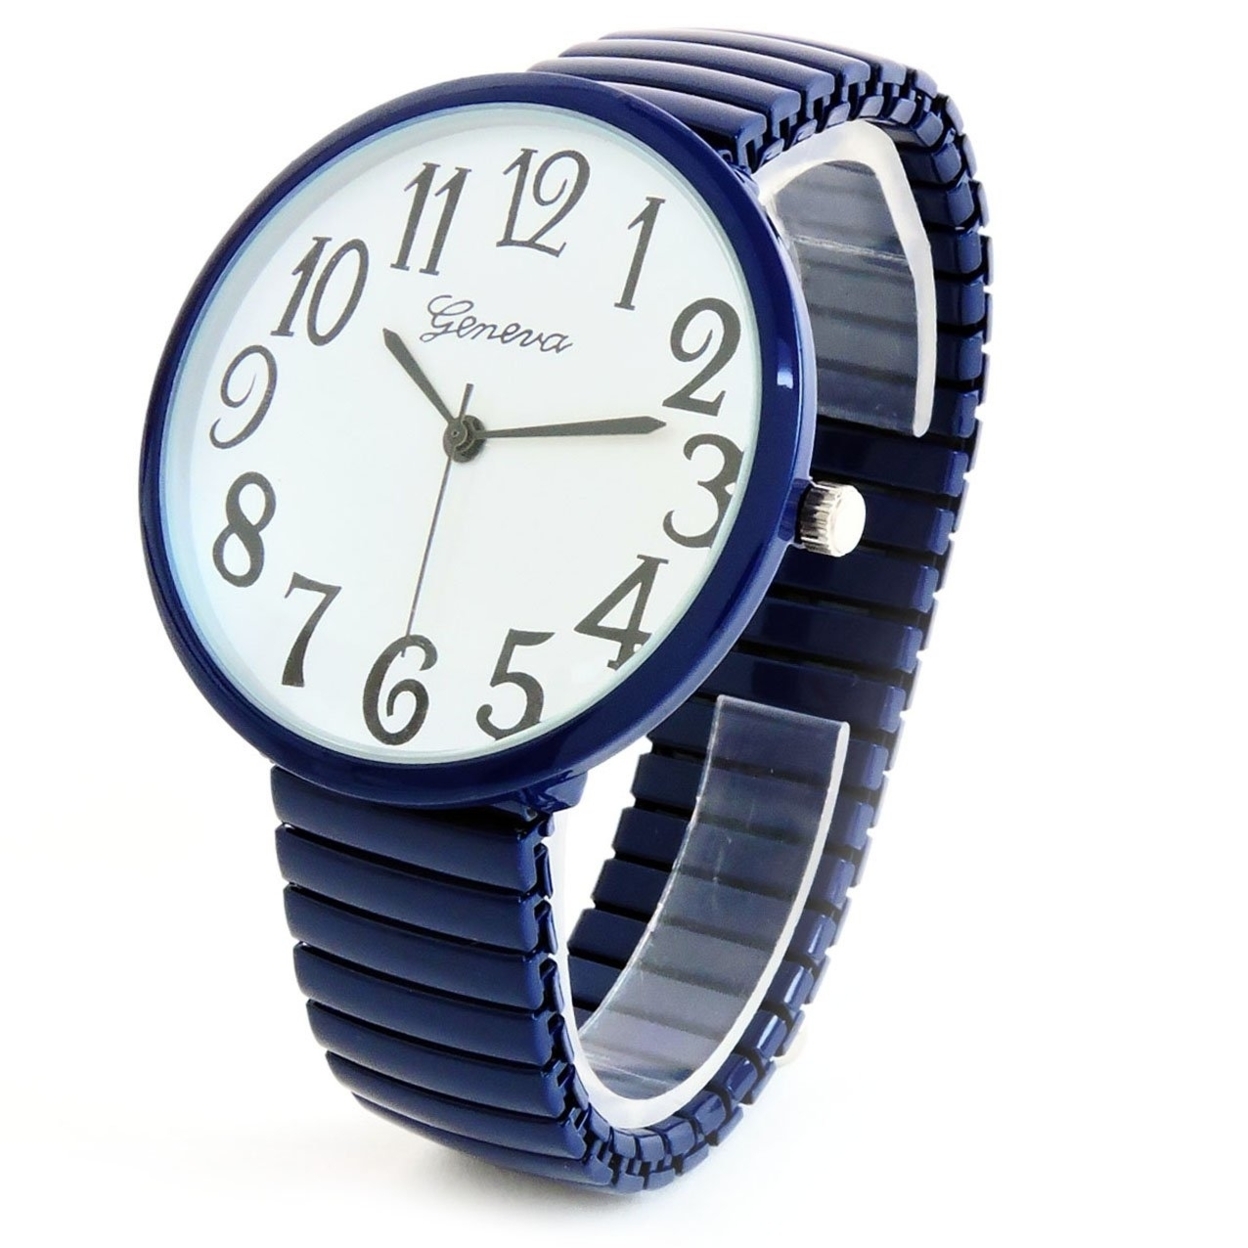 Super Large Face Easy To Read Stretch Band Geneva Watch - Navy Blue